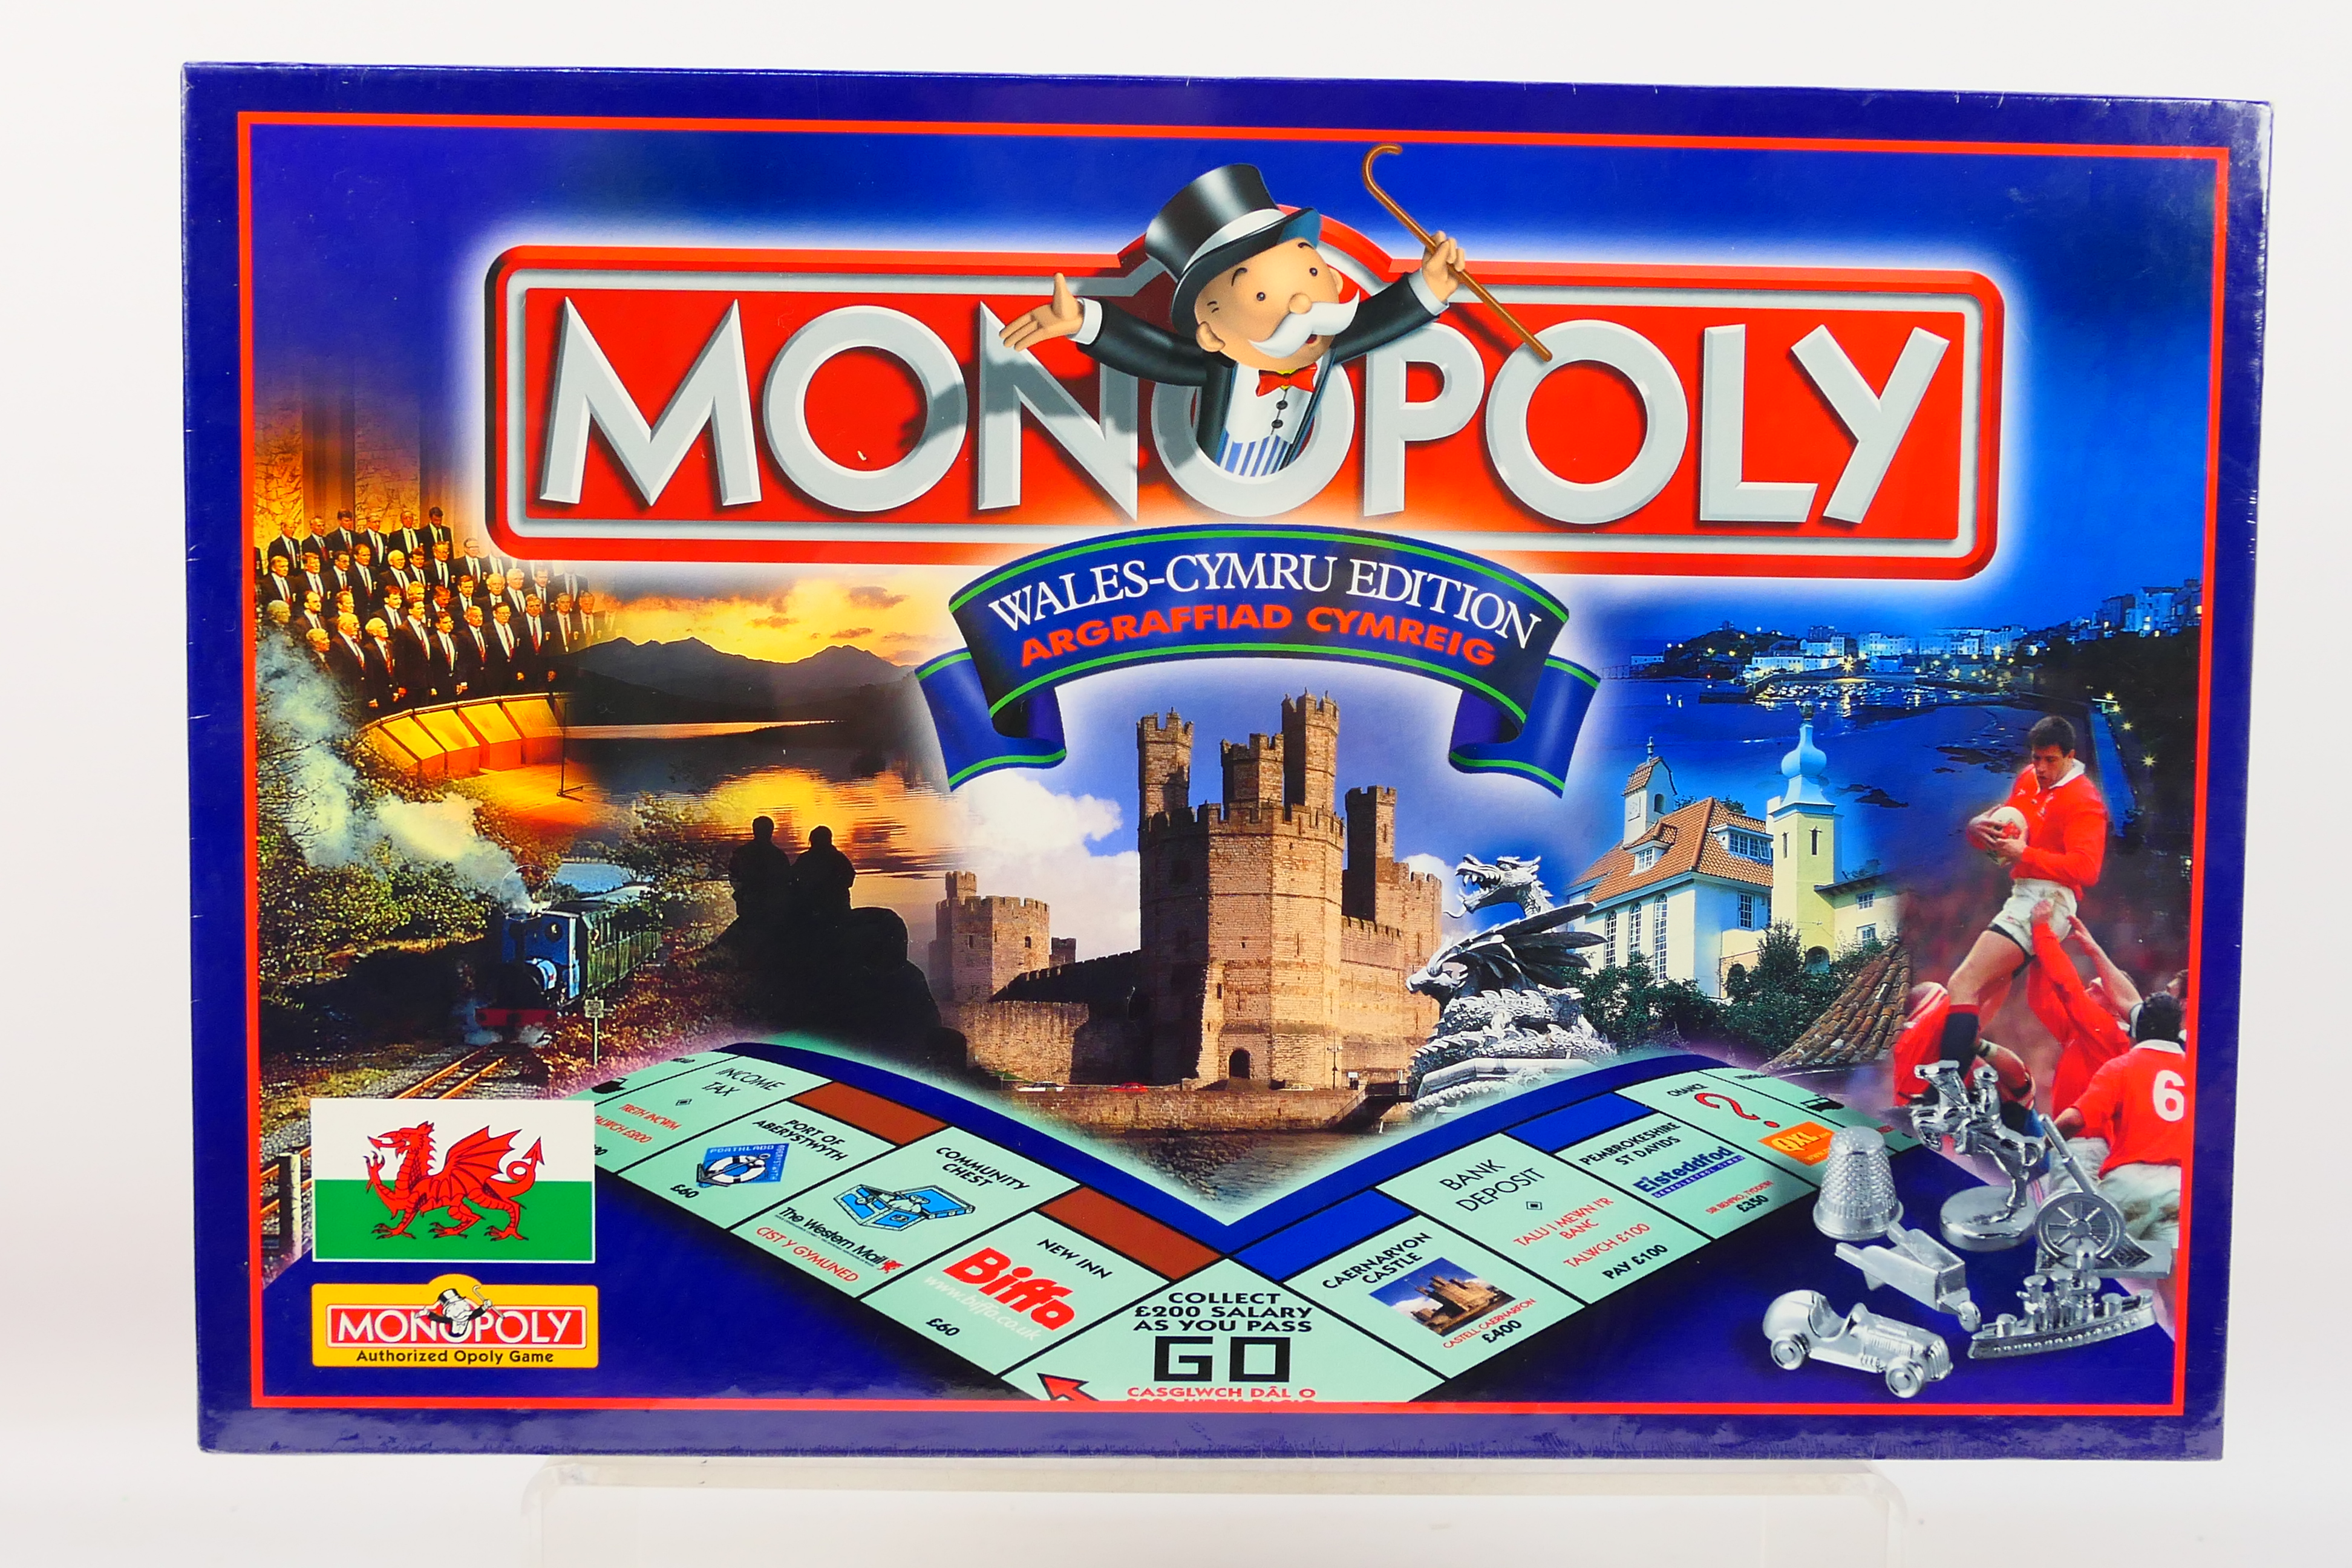 Hasbro - Monopoly - An unopened Wales-Cy